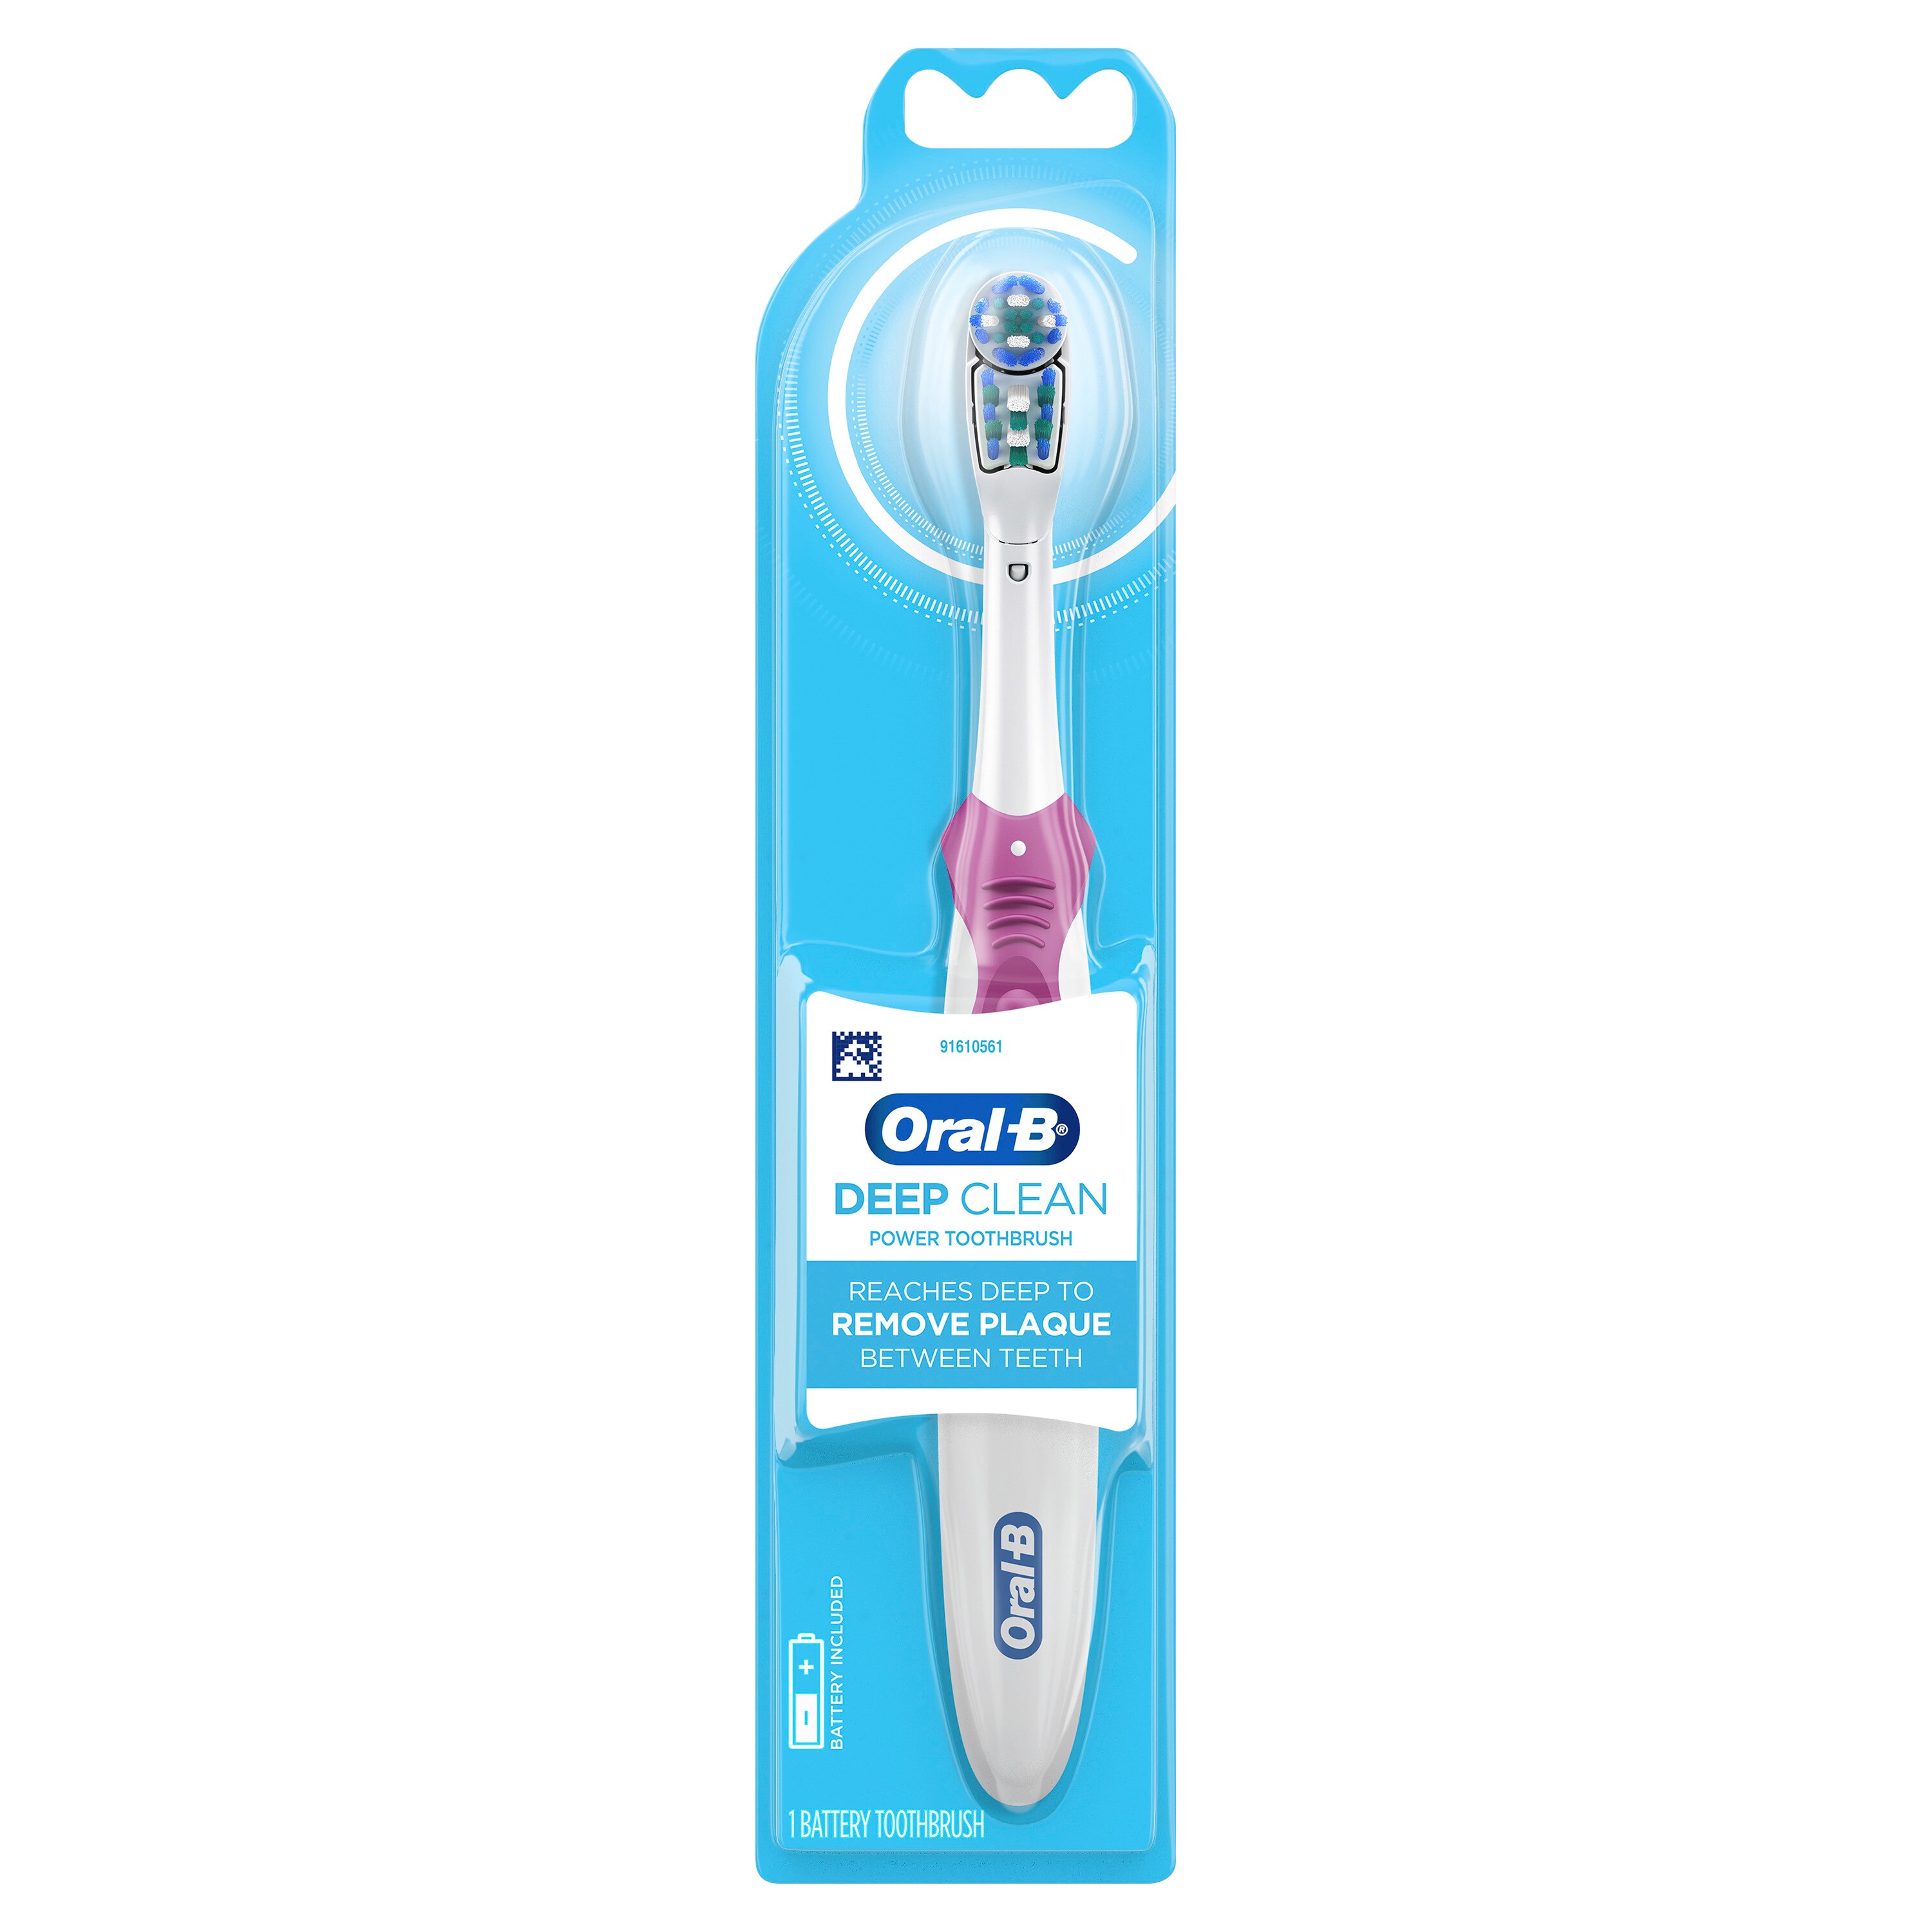 Oral-B Complete Deep Clean Battery Powered Electric Toothbrush, 1 Count, Colors May Vary